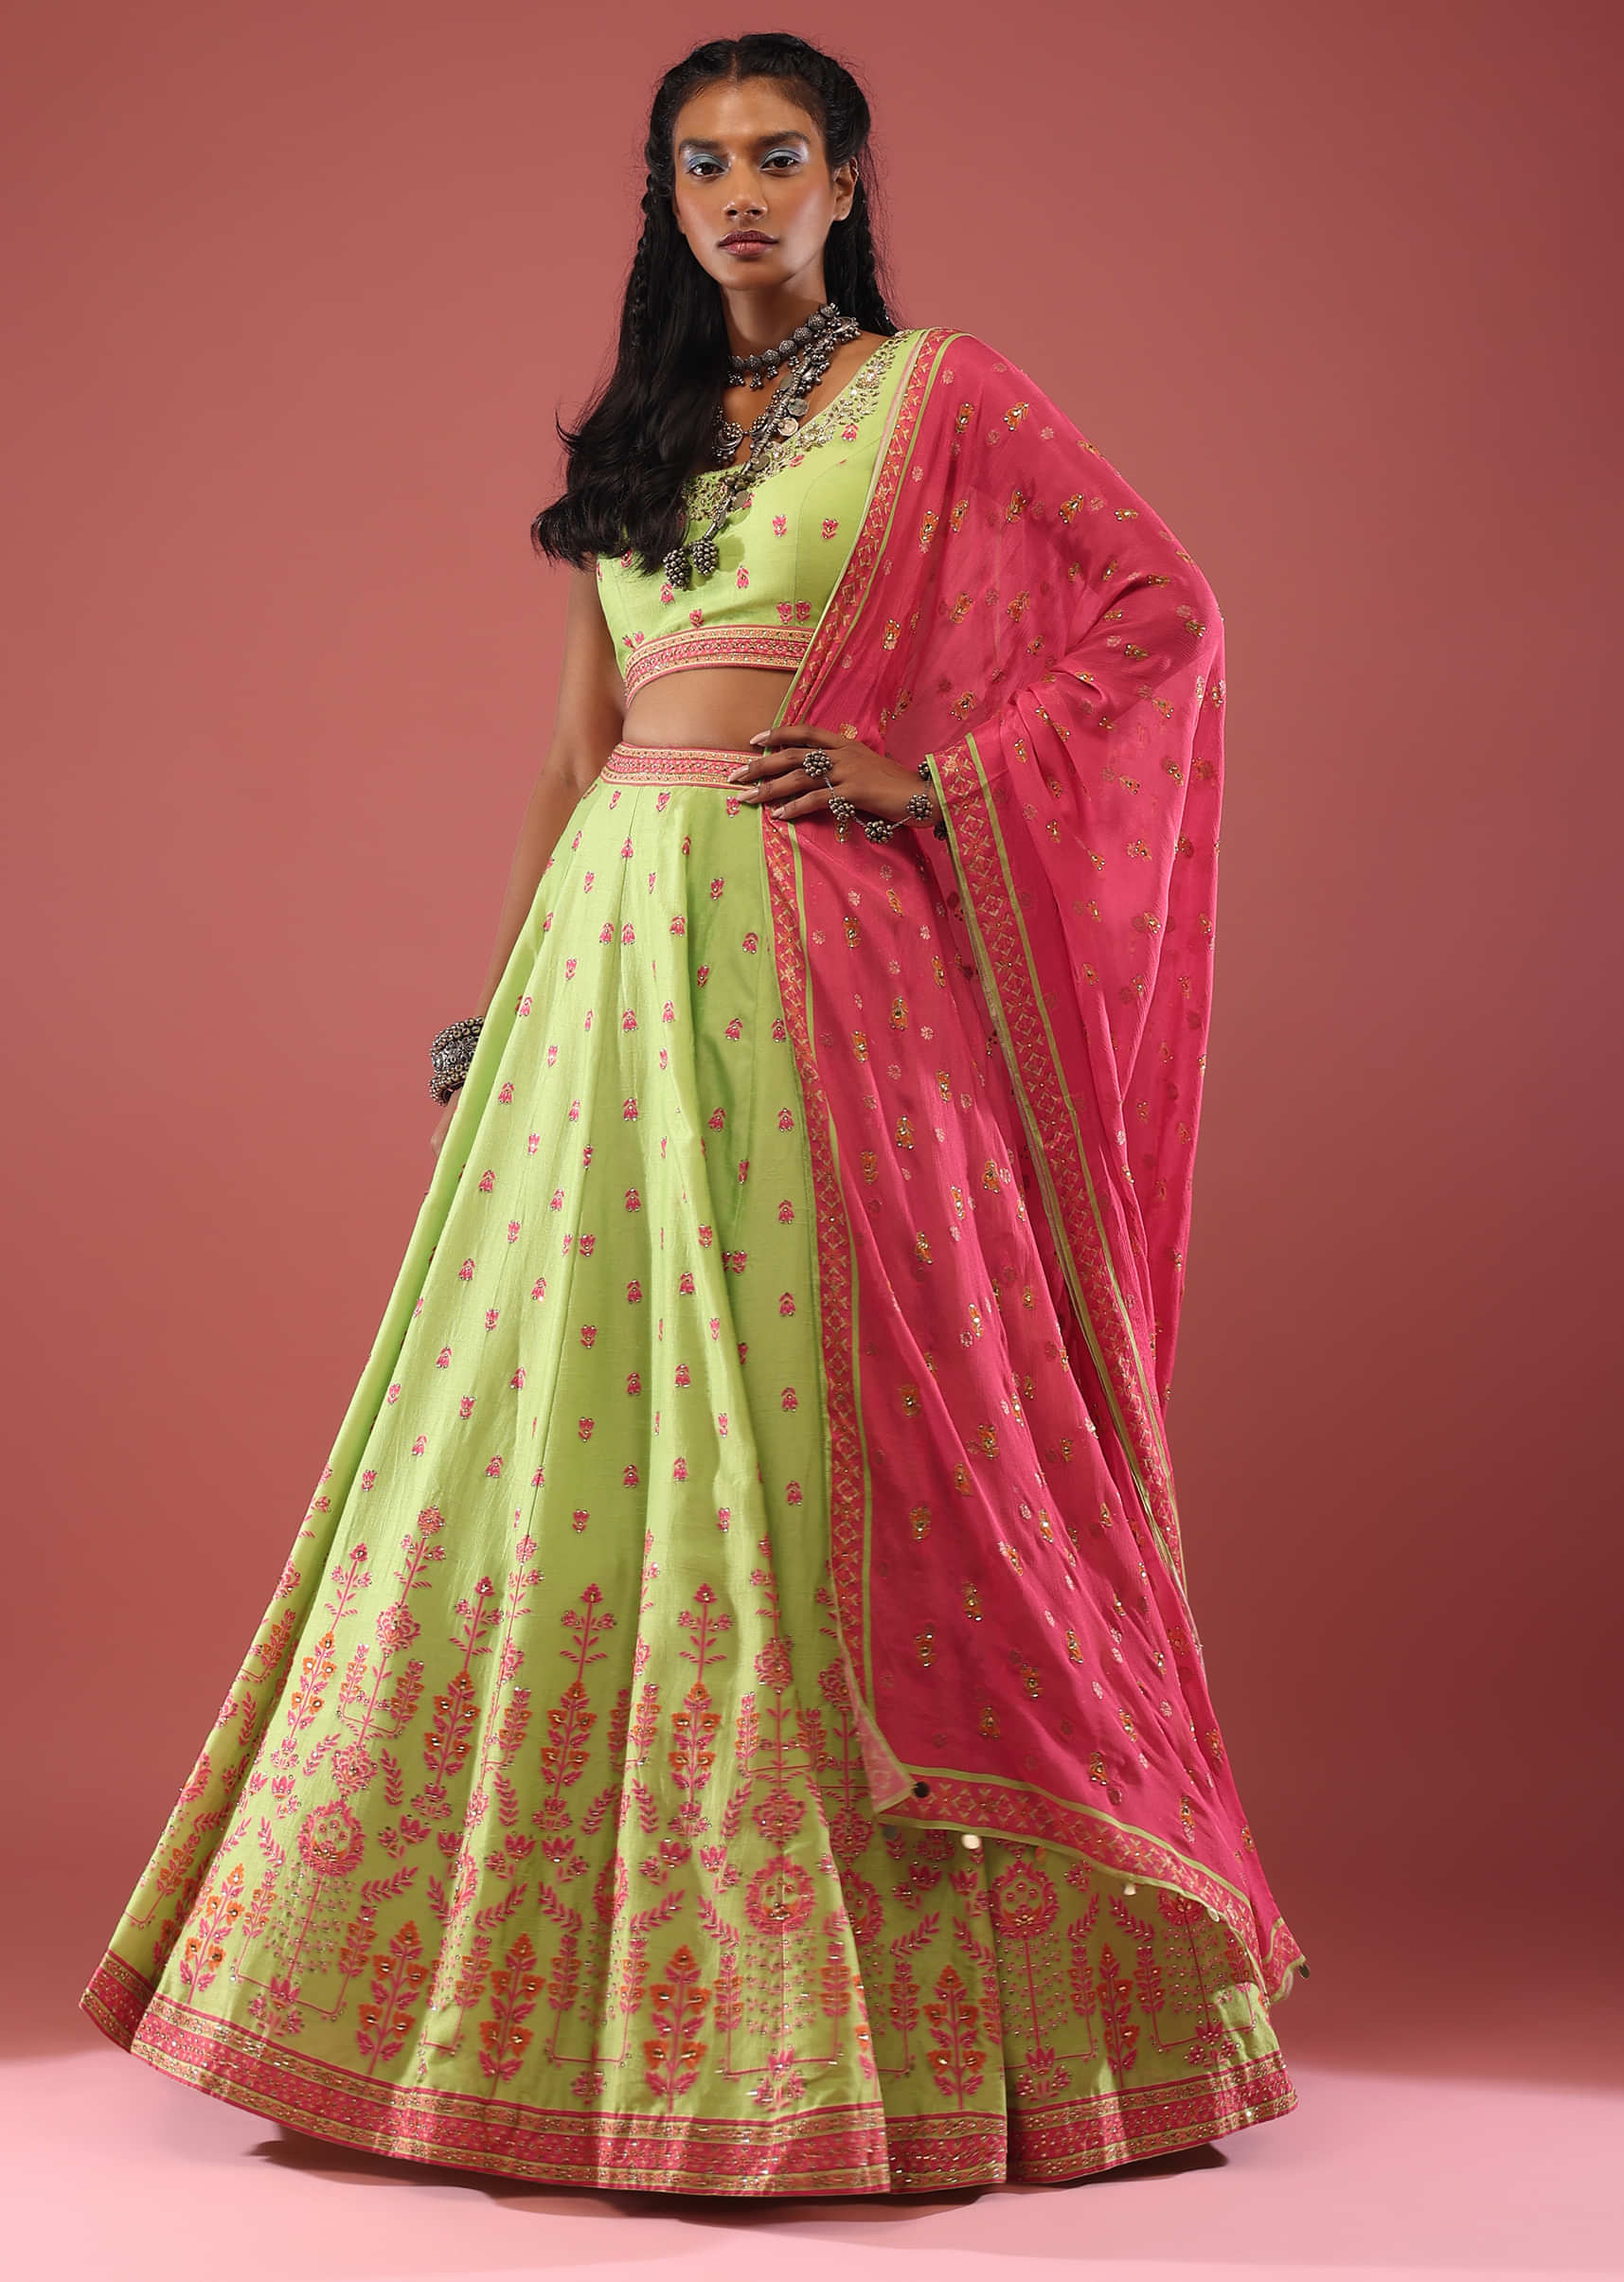 Pista Green Silk Lehenga And Blouse With Floral Print And A Well-Decorated Hem In Stone Work